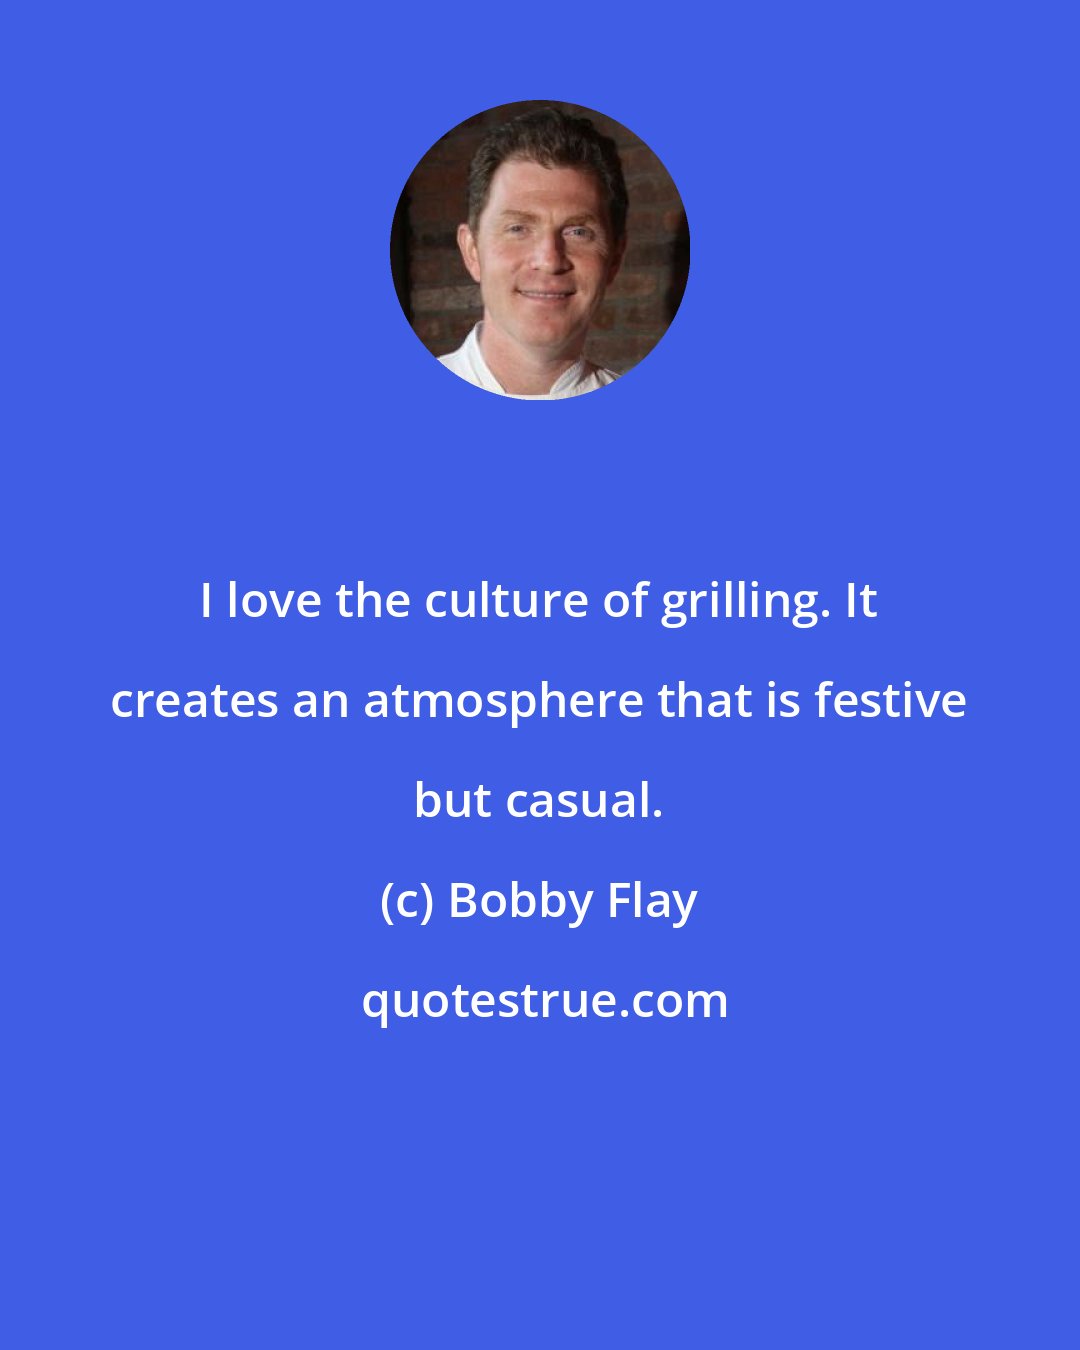 Bobby Flay: I love the culture of grilling. It creates an atmosphere that is festive but casual.